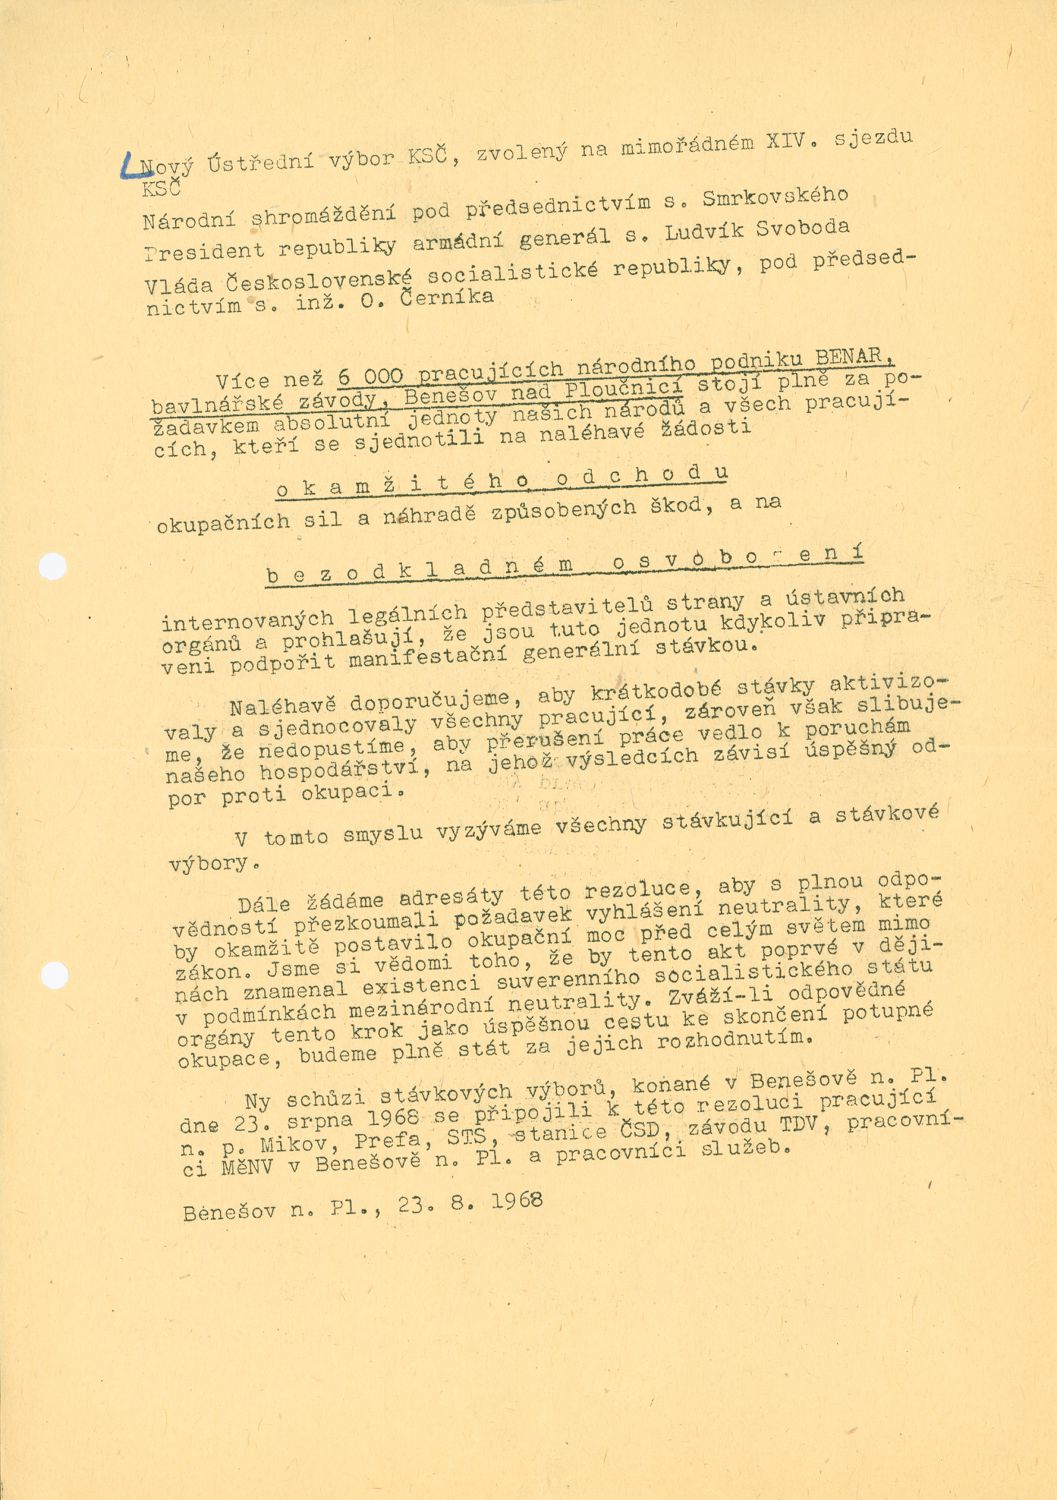 Declaration of Support of Trade Unions for the New Political Leadership of Czechoslovakia